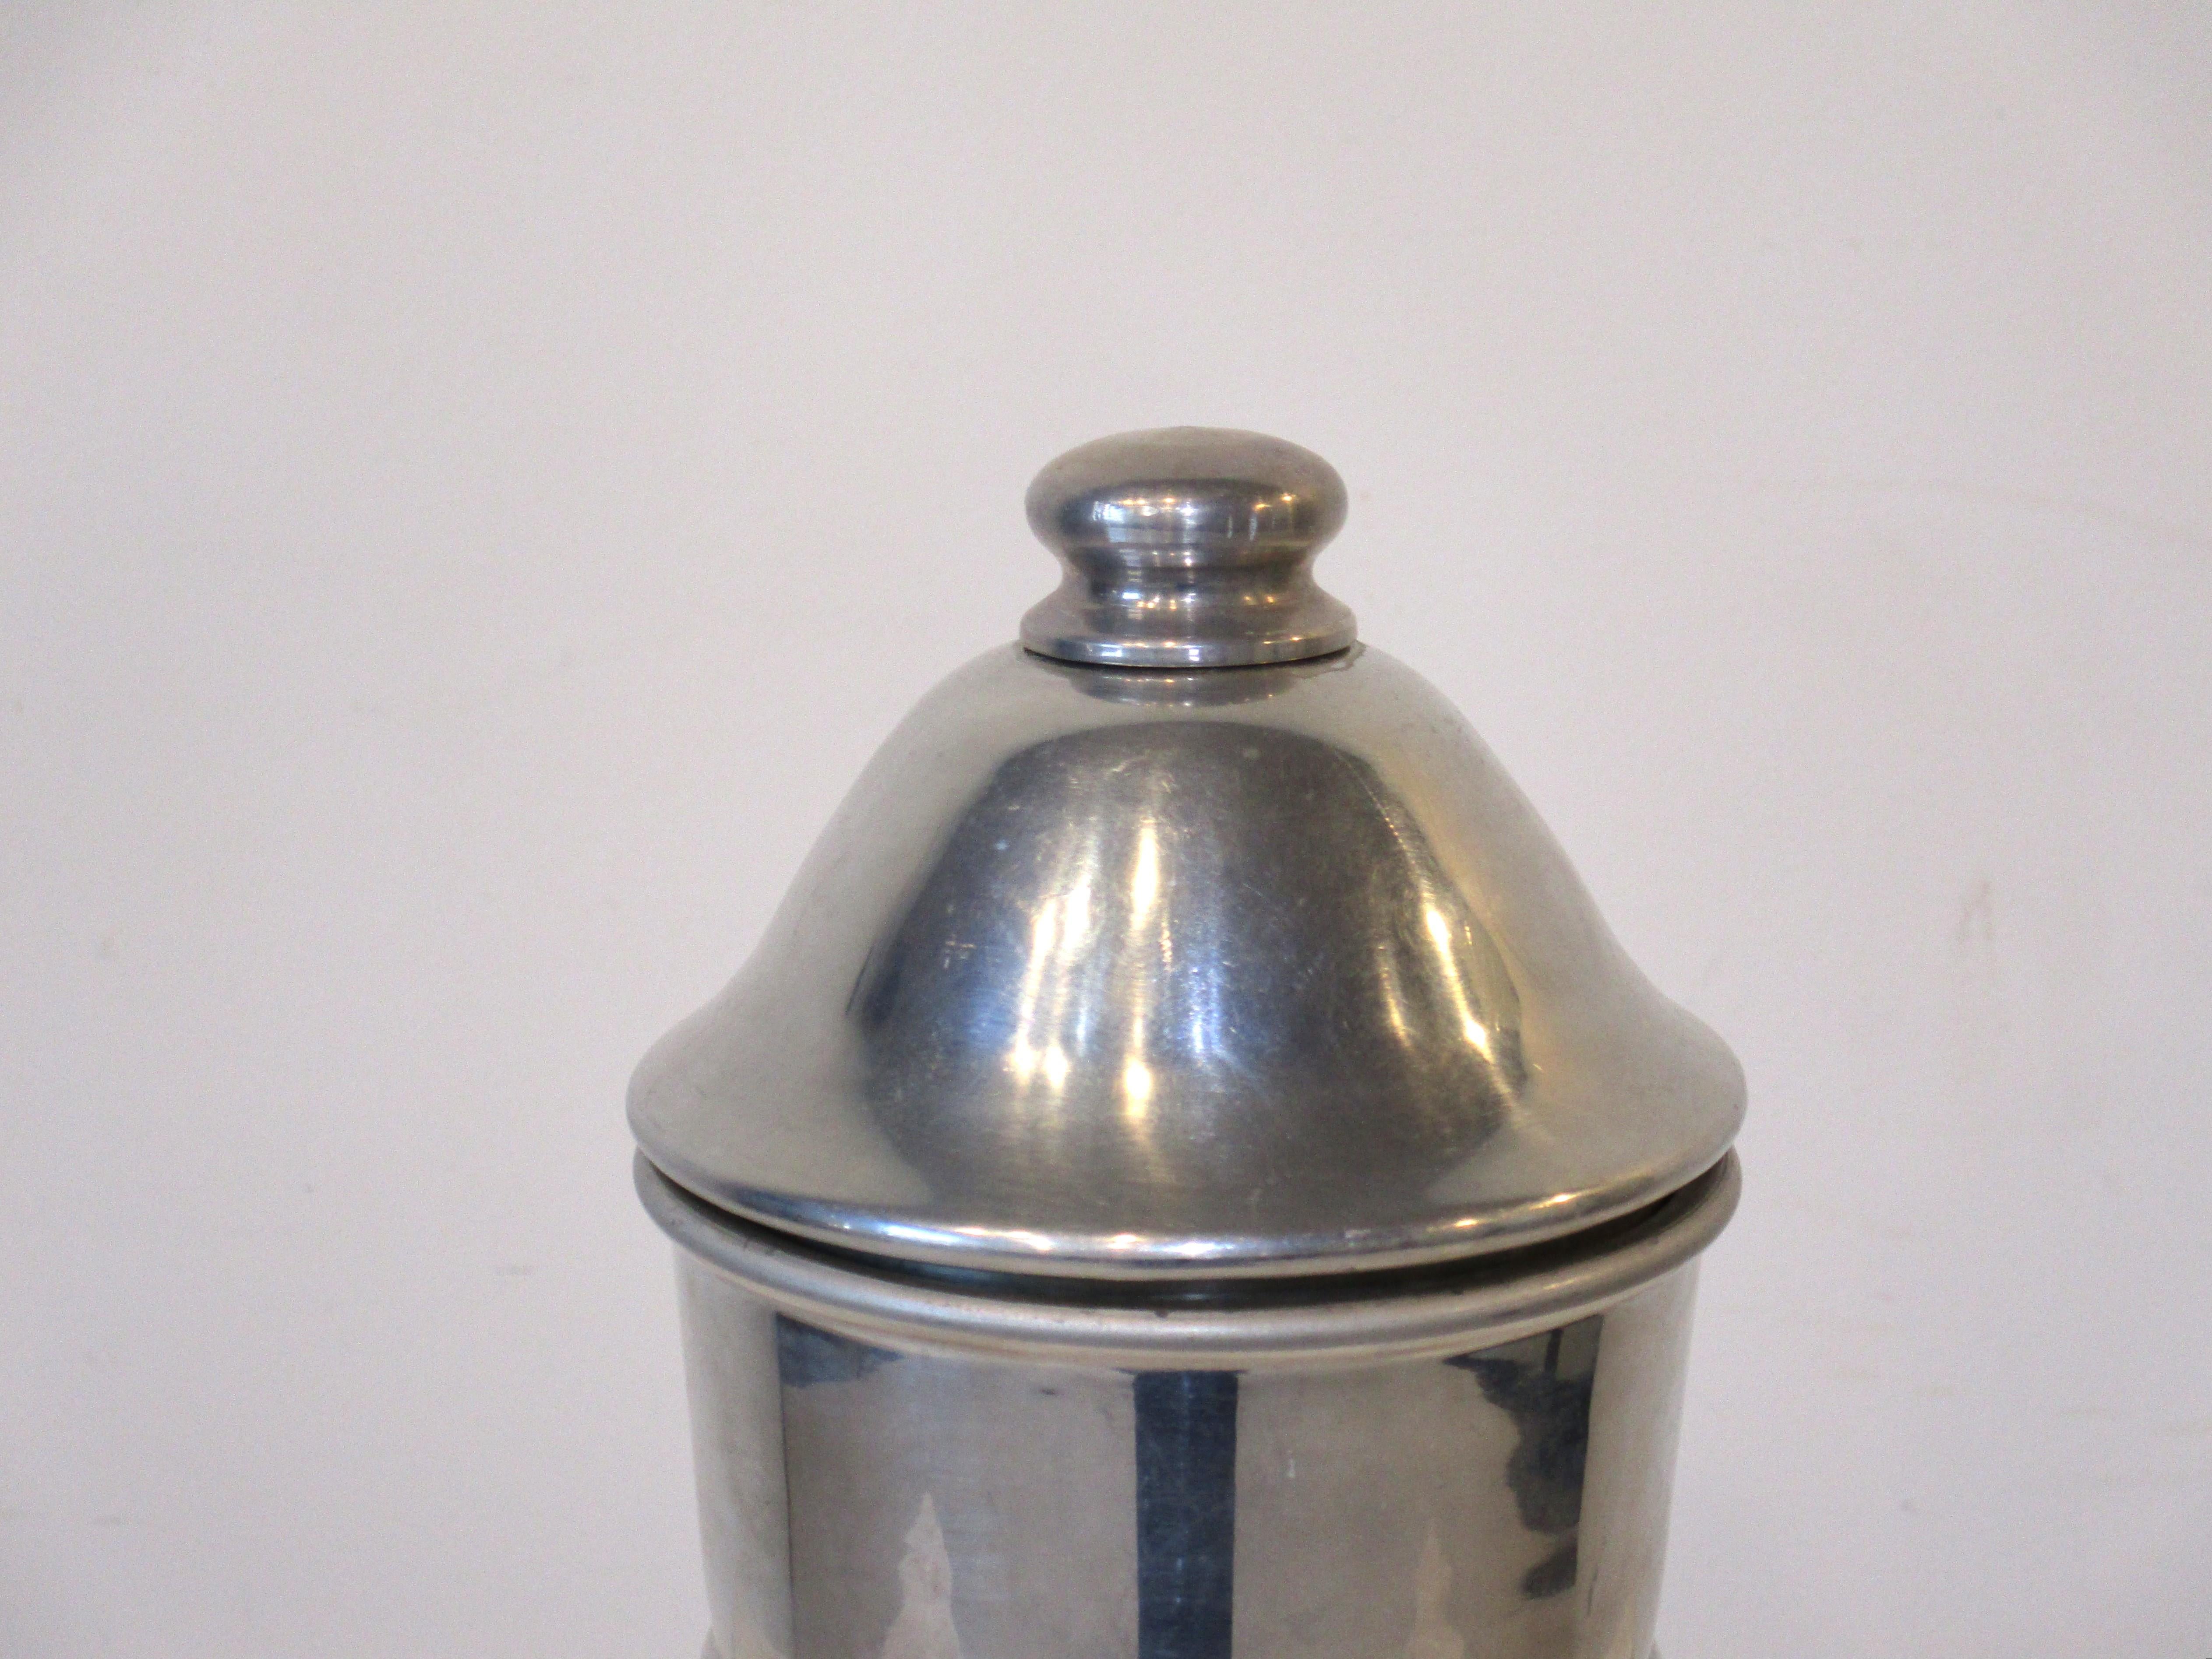 Art Deco Styled Aluminum Cocktail Shaker by Kraftware In Good Condition For Sale In Cincinnati, OH